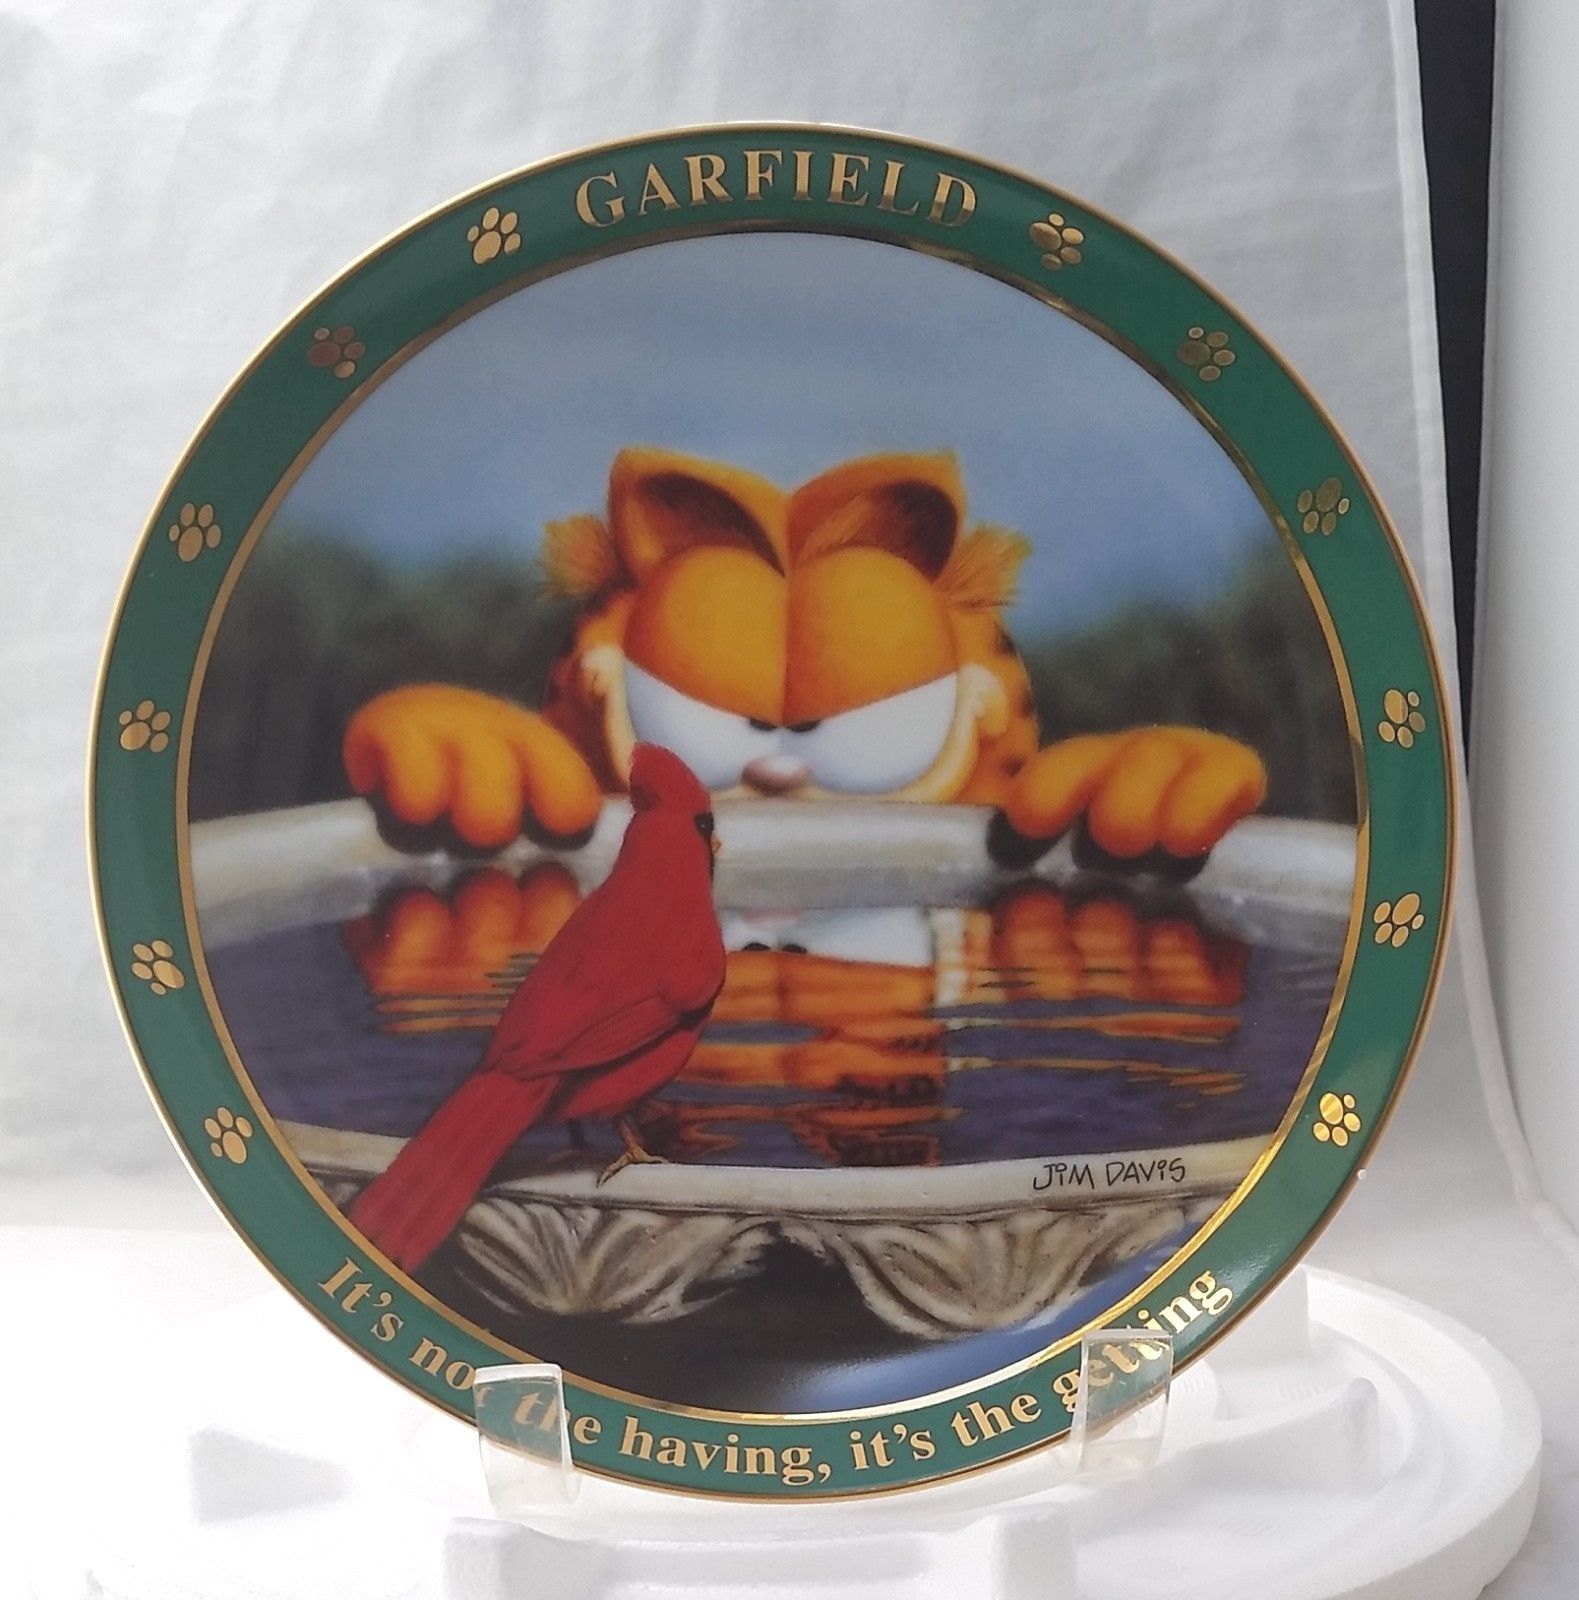 Garfield Collector plate A DAY WITH GARFIELD IT’S NOT THE HAVING ITS THE GETTING - $14.99